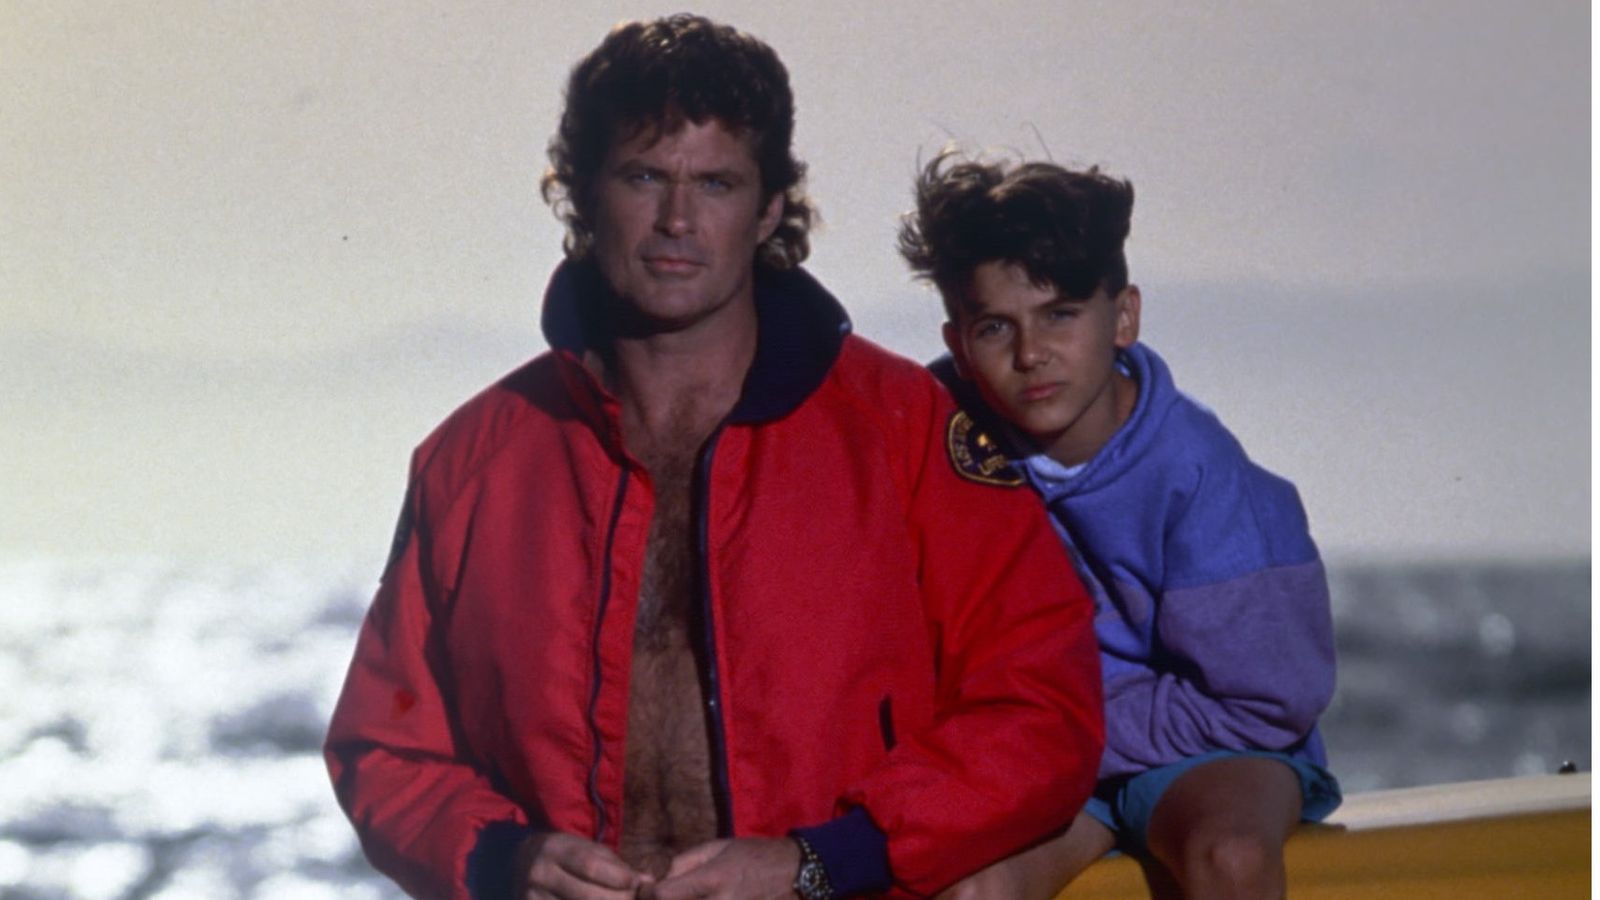 Baywatch What Was It Like To Star In One Of The Biggest Shows Of The 90s Ents And Arts News